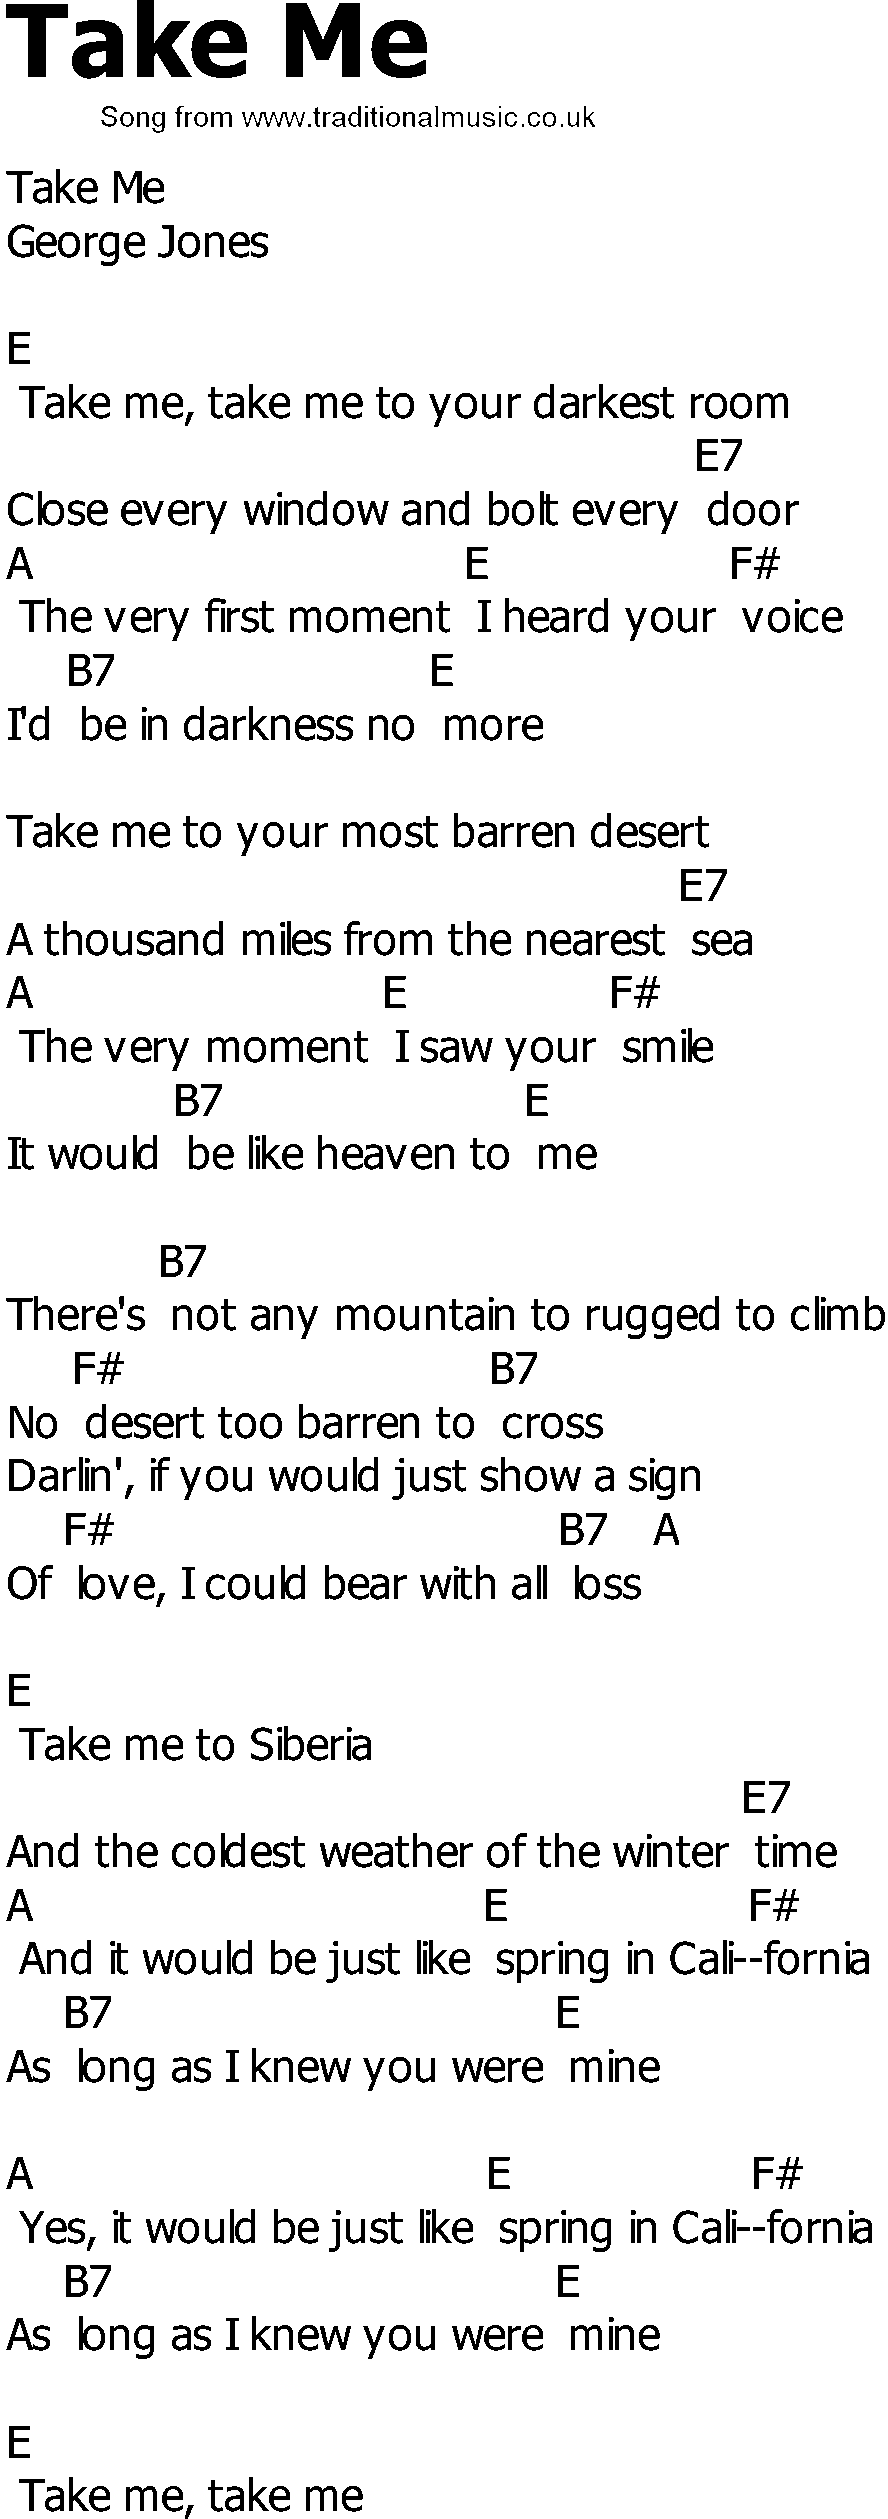 Old Country song lyrics with chords - Take Me